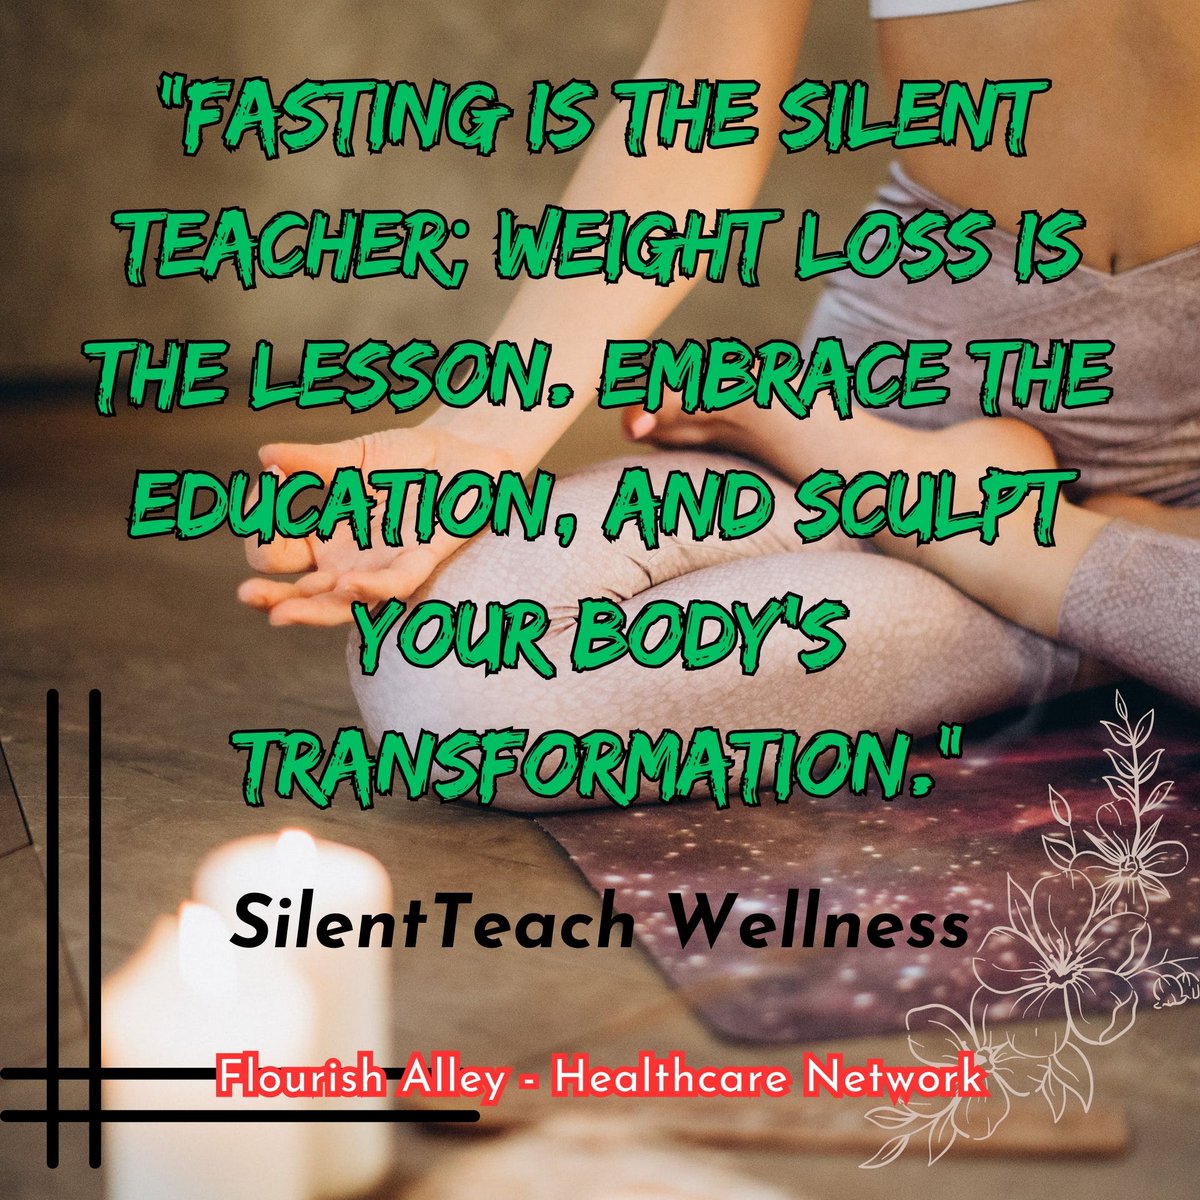 QuickLoss Mastery
Visit- linktr.ee/FlourishAlley

#BurnFat  #IntermittentFasting #healthylifestyle #exerciseismedicine #diet #fetchyourbody2024 #healthyeating #fitness #RunningWithTumiSole #ownpace #gymworkouts  #nevergiveup #healthyhabits #consistency #Endurance #determination